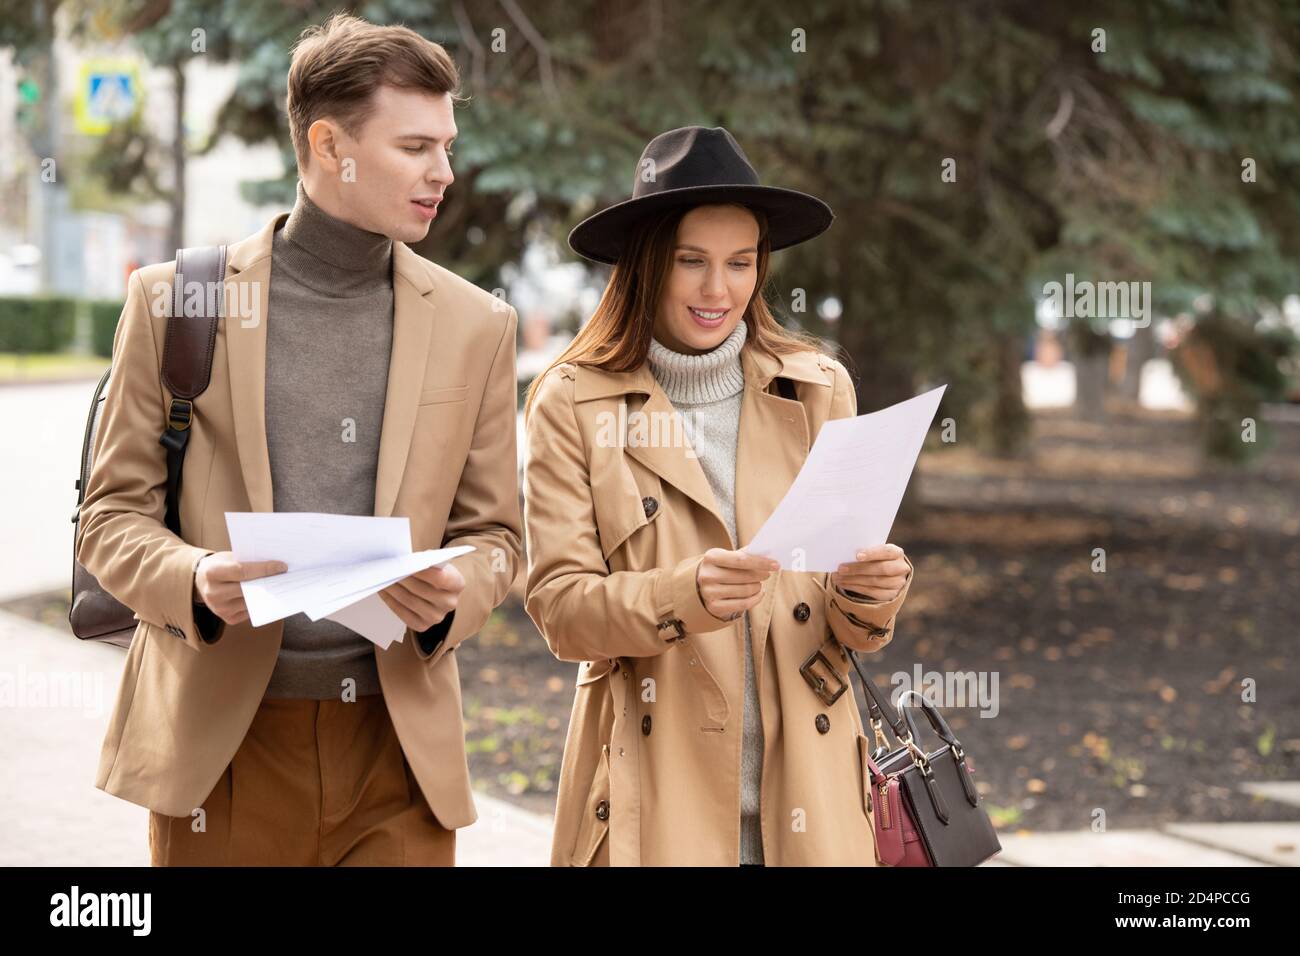 Two young colleagues in elegant casualwear reading papers and discussing them Stock Photo